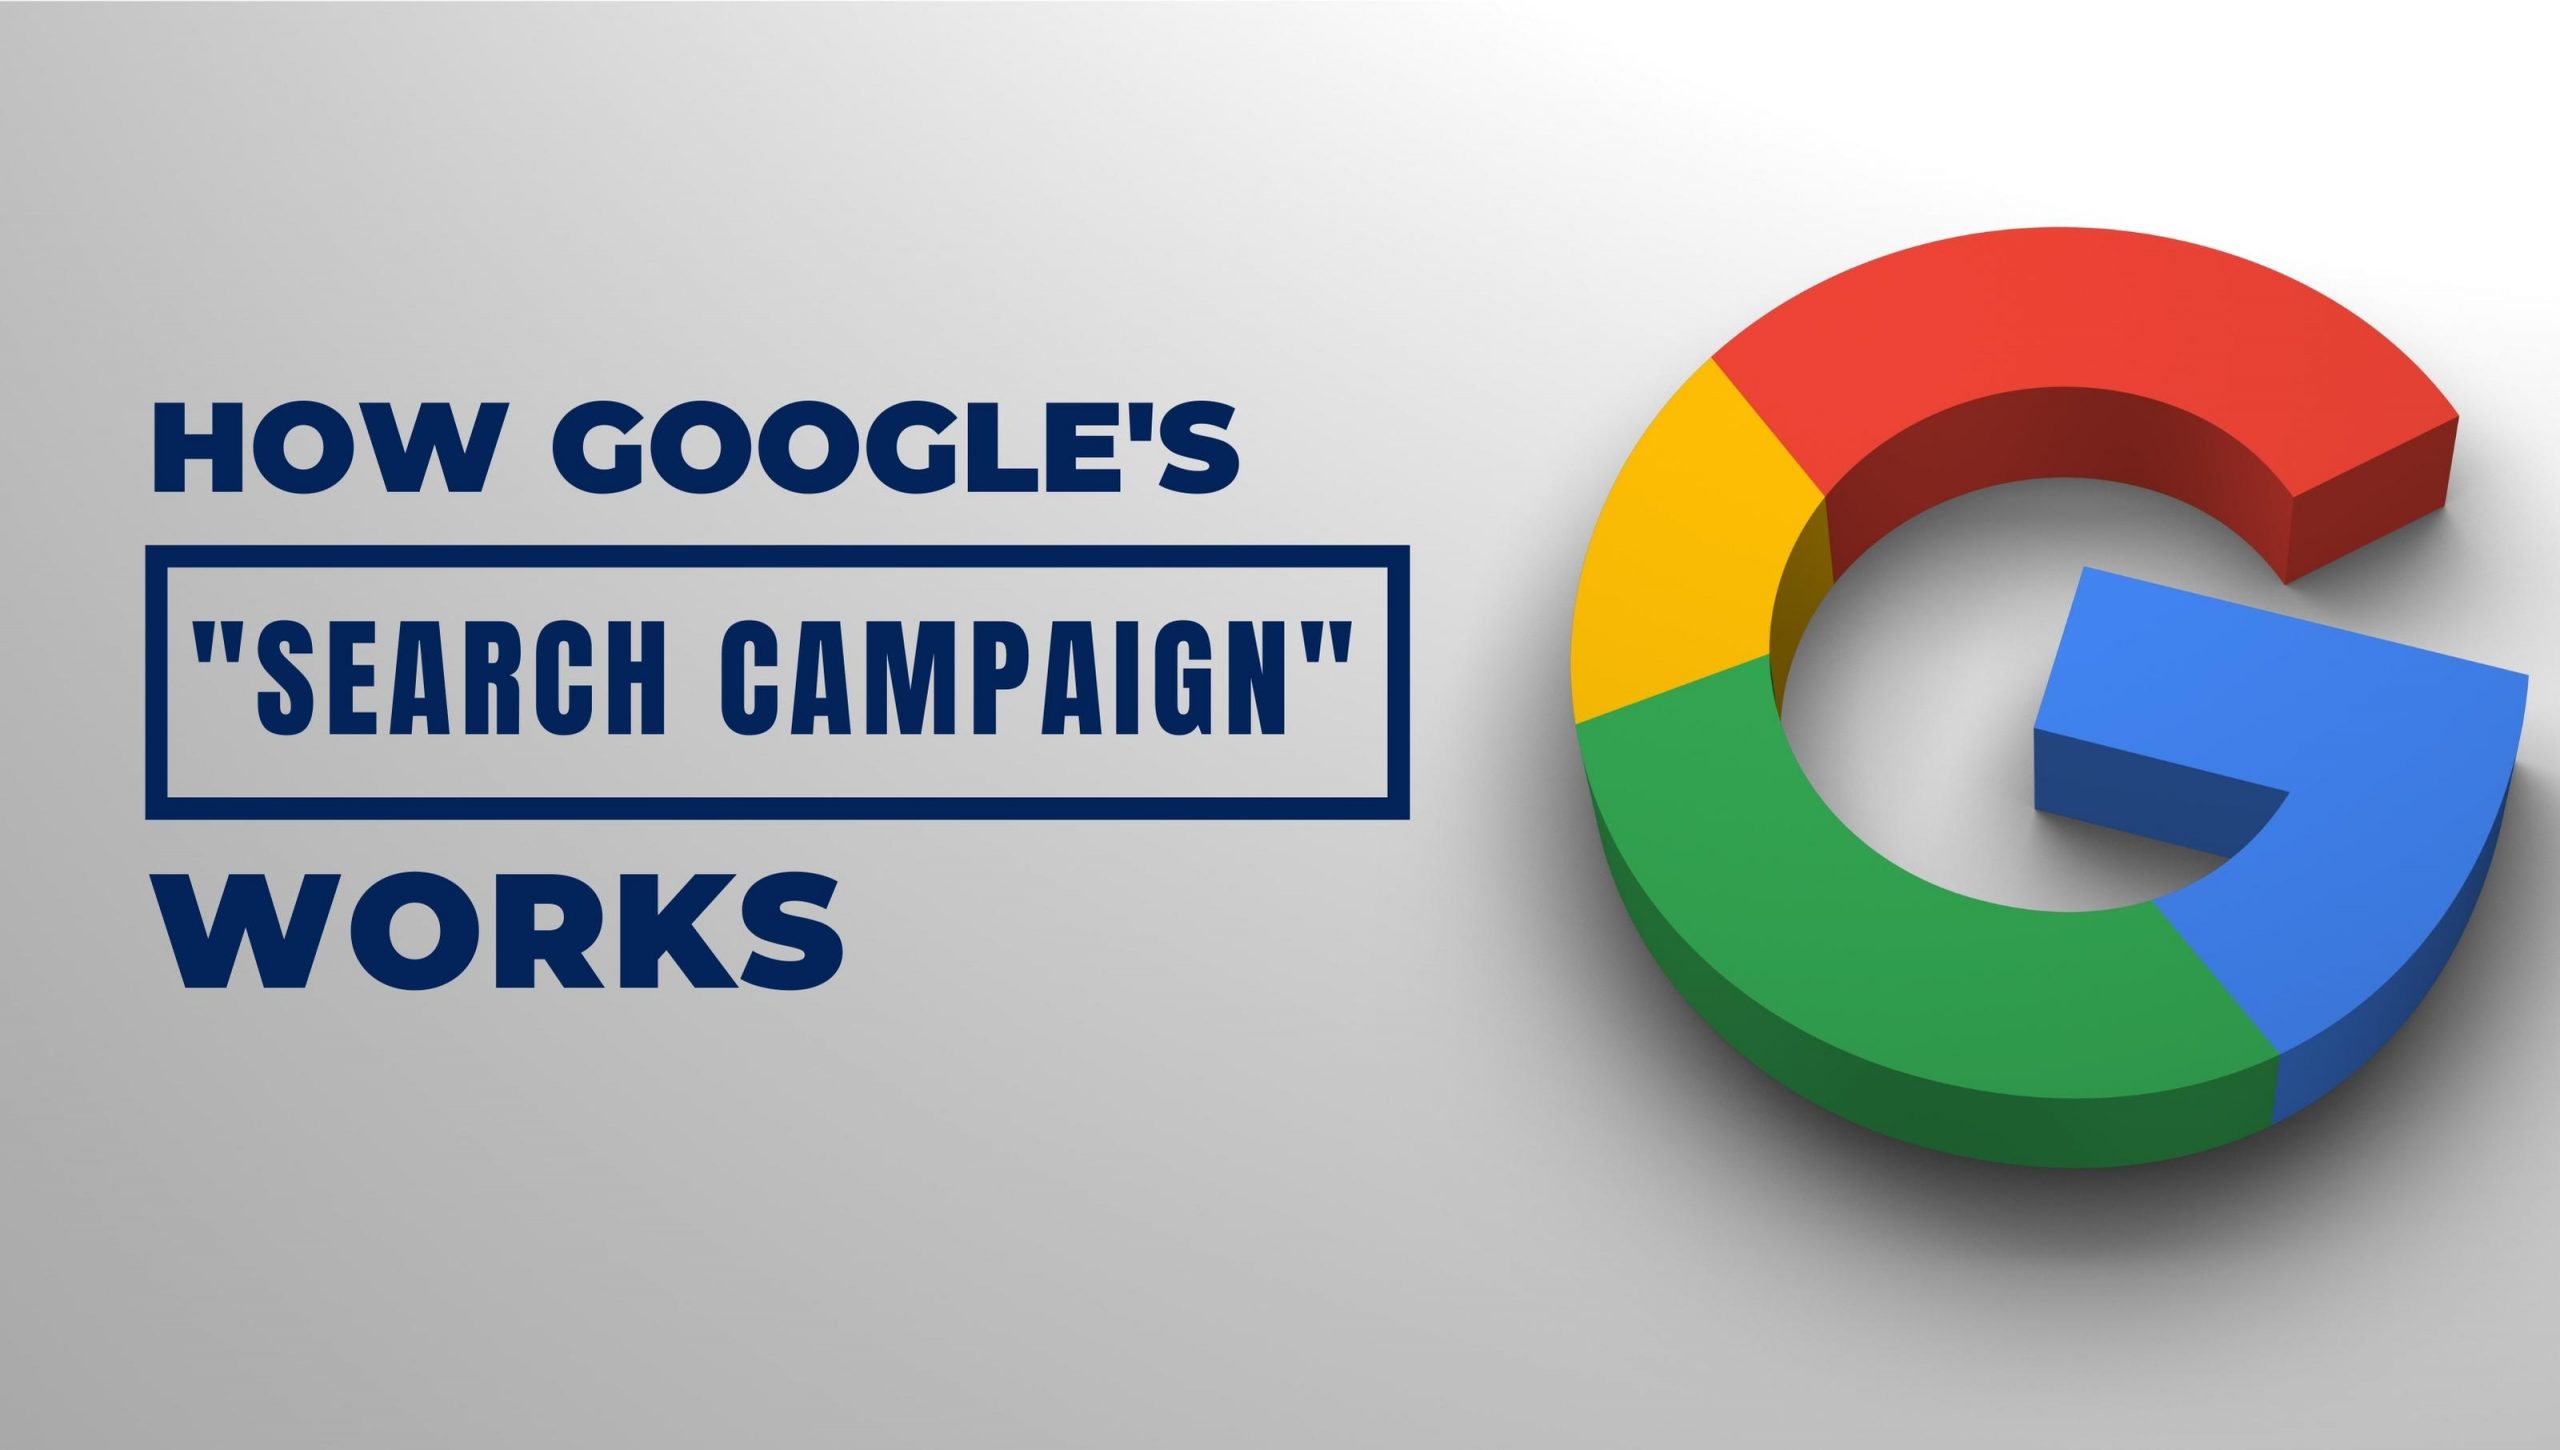 How Google's "Search Campaign" Works